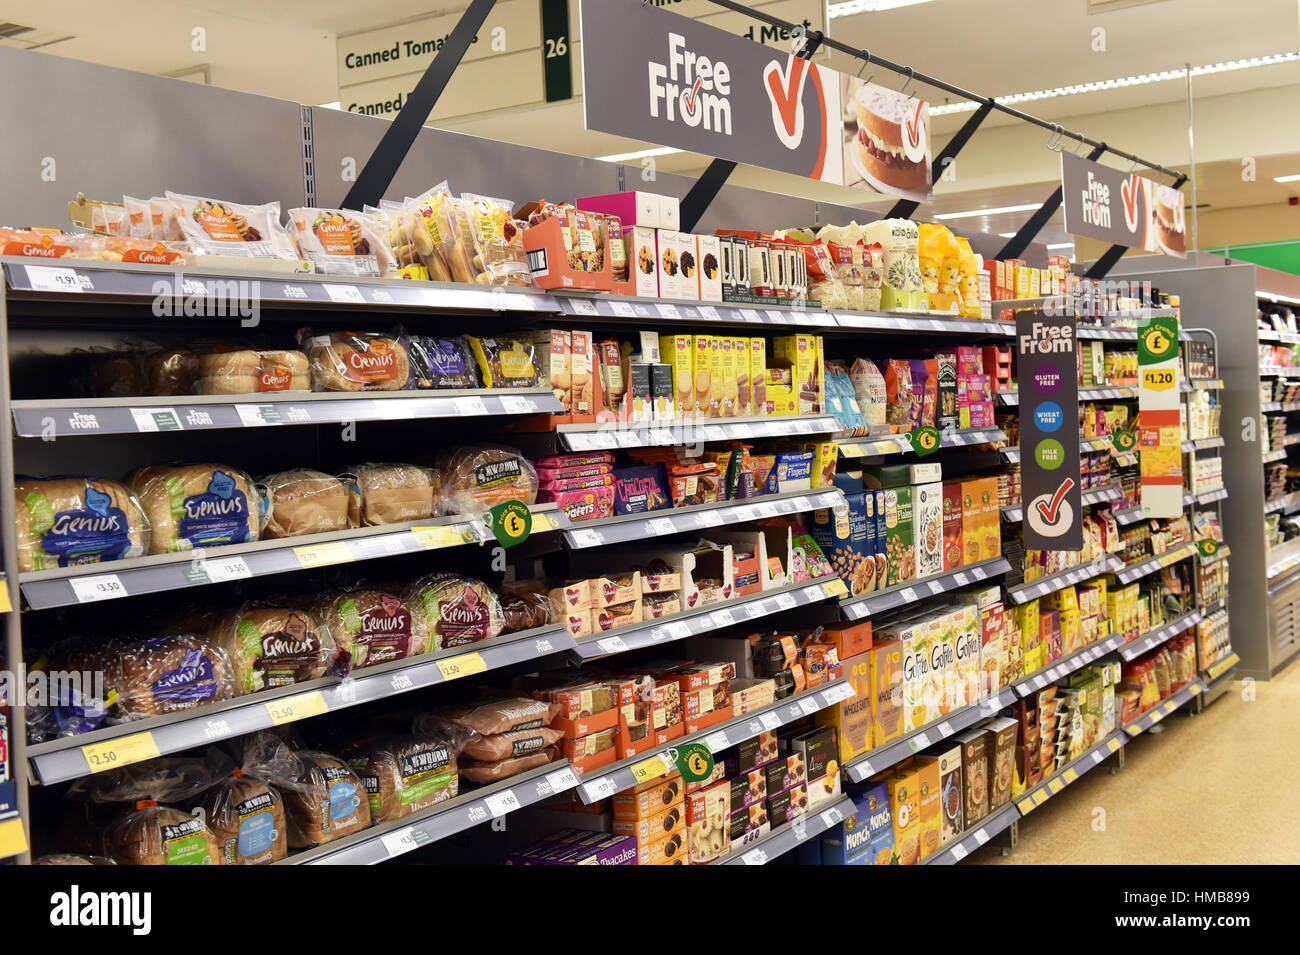 Free From range display in a supermarket UK Stock Photo